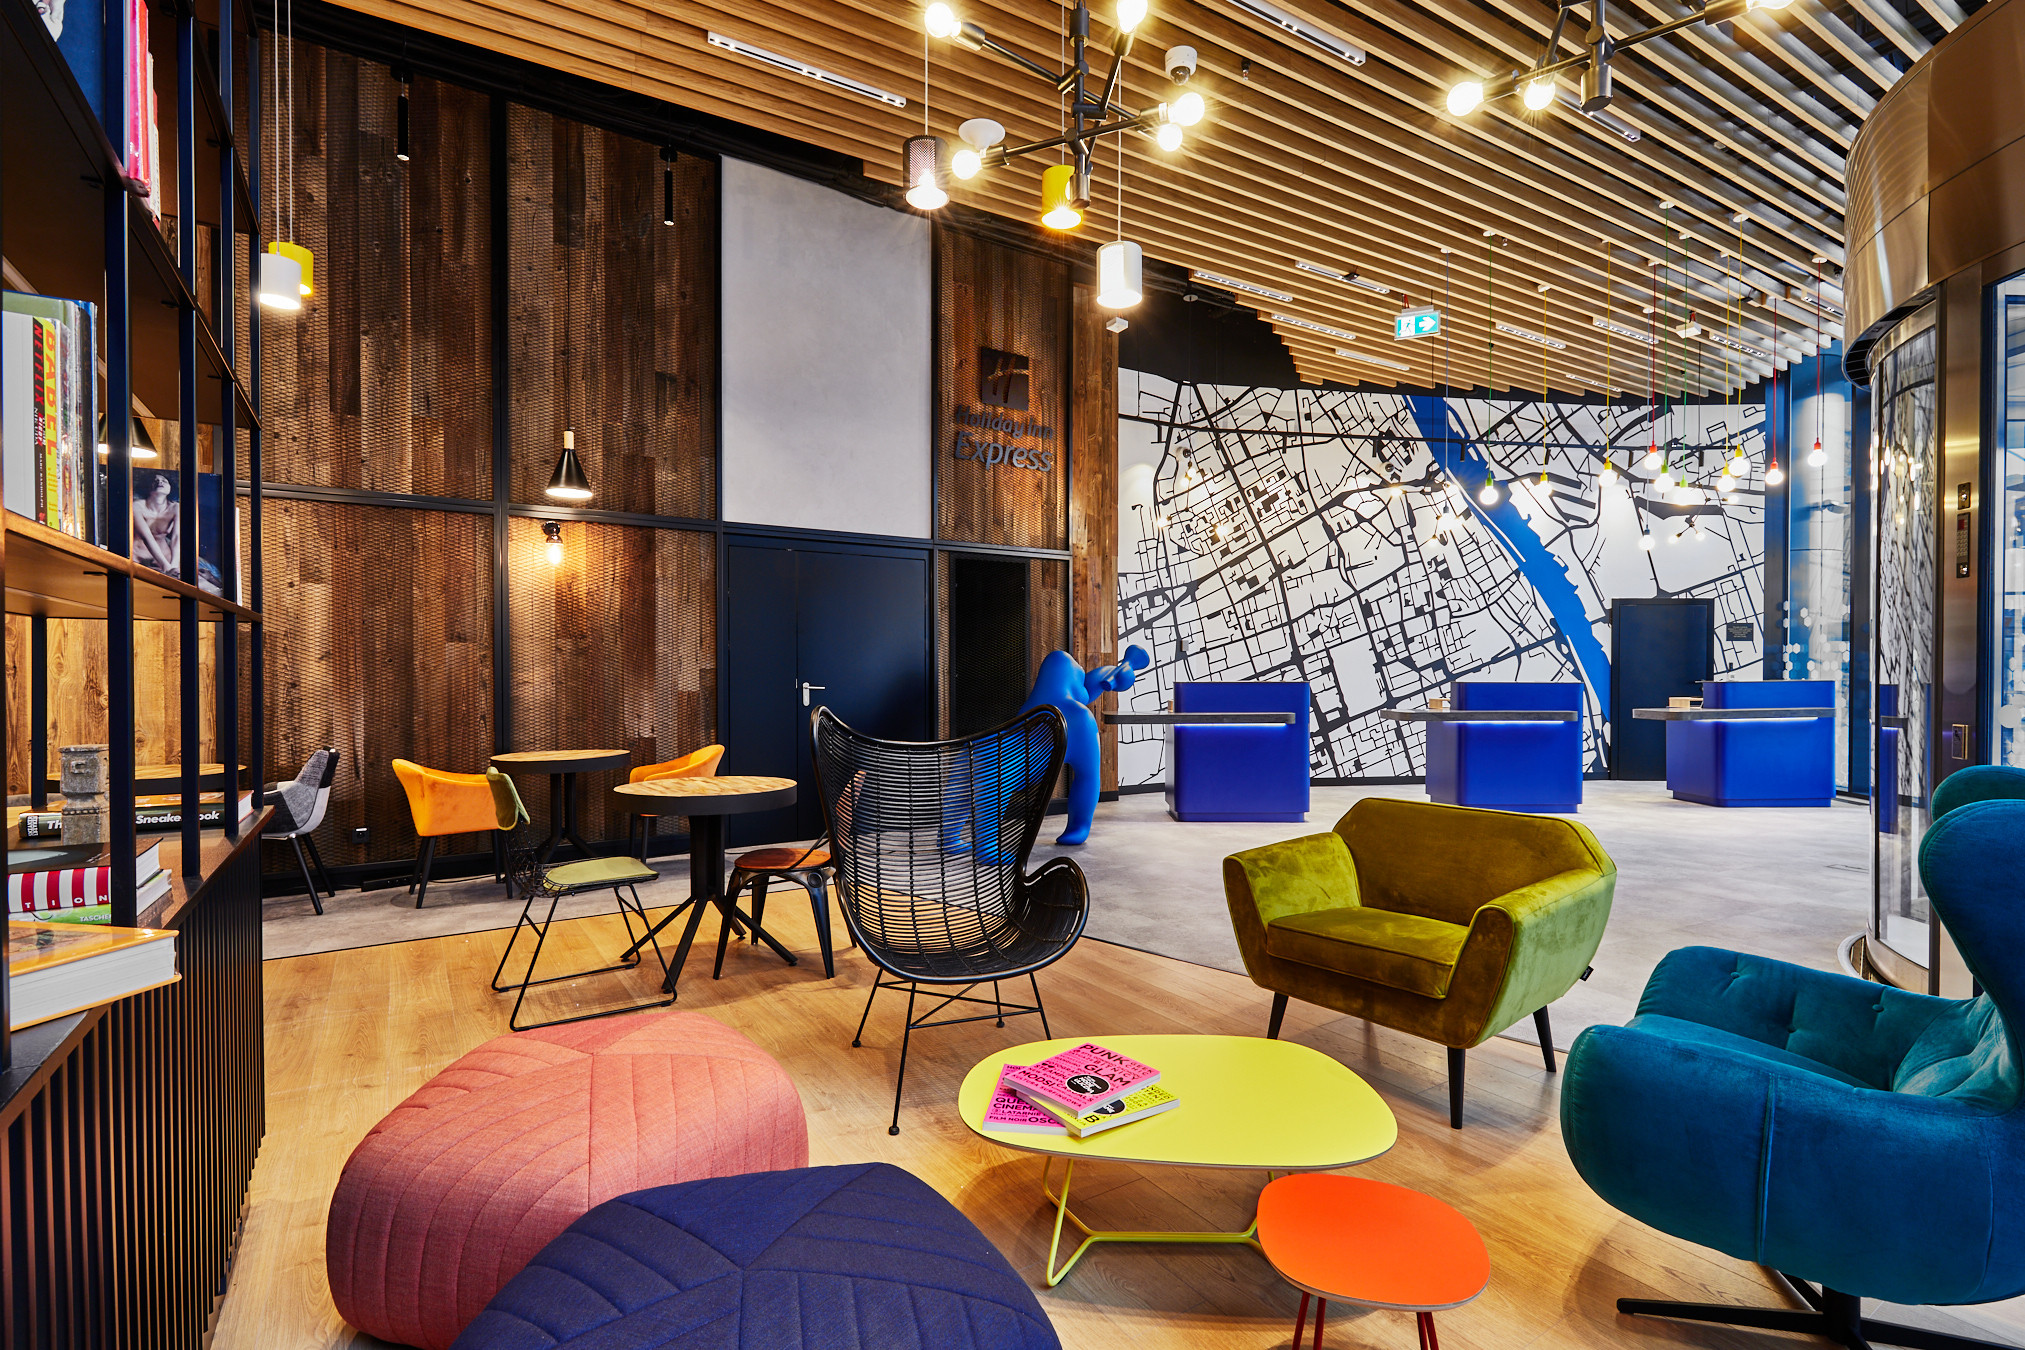 The Hub, A Multifunctional Hotel